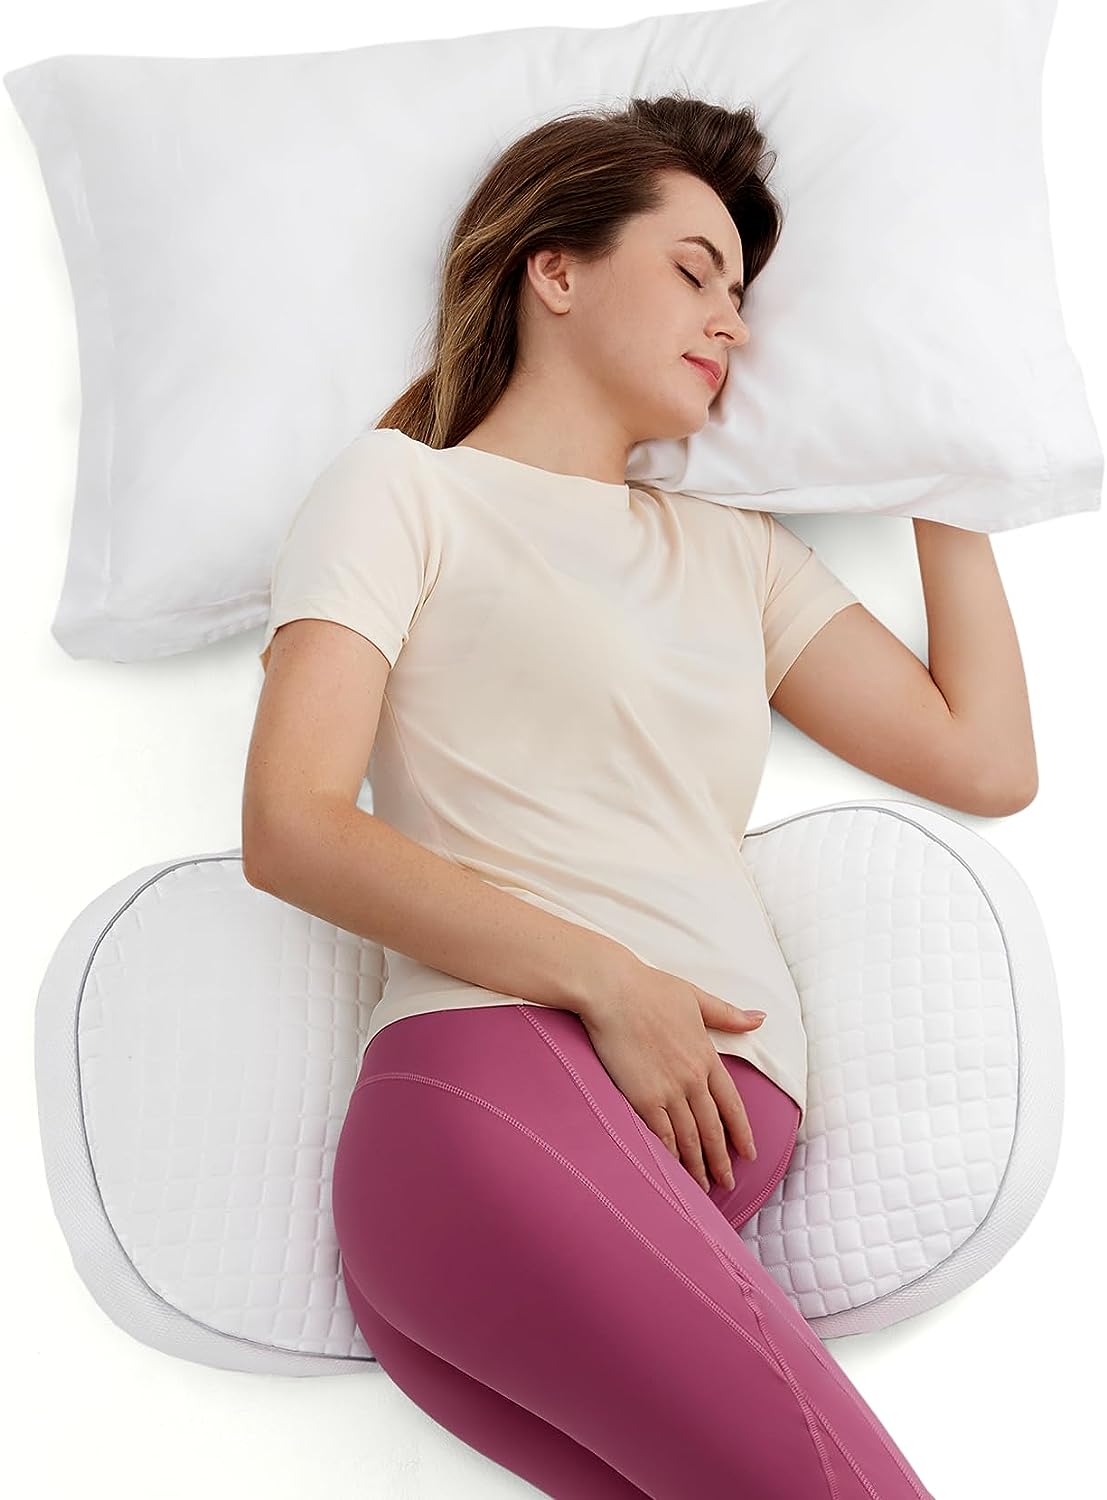 Momcozy Pregnancy Wedge Pillow Review